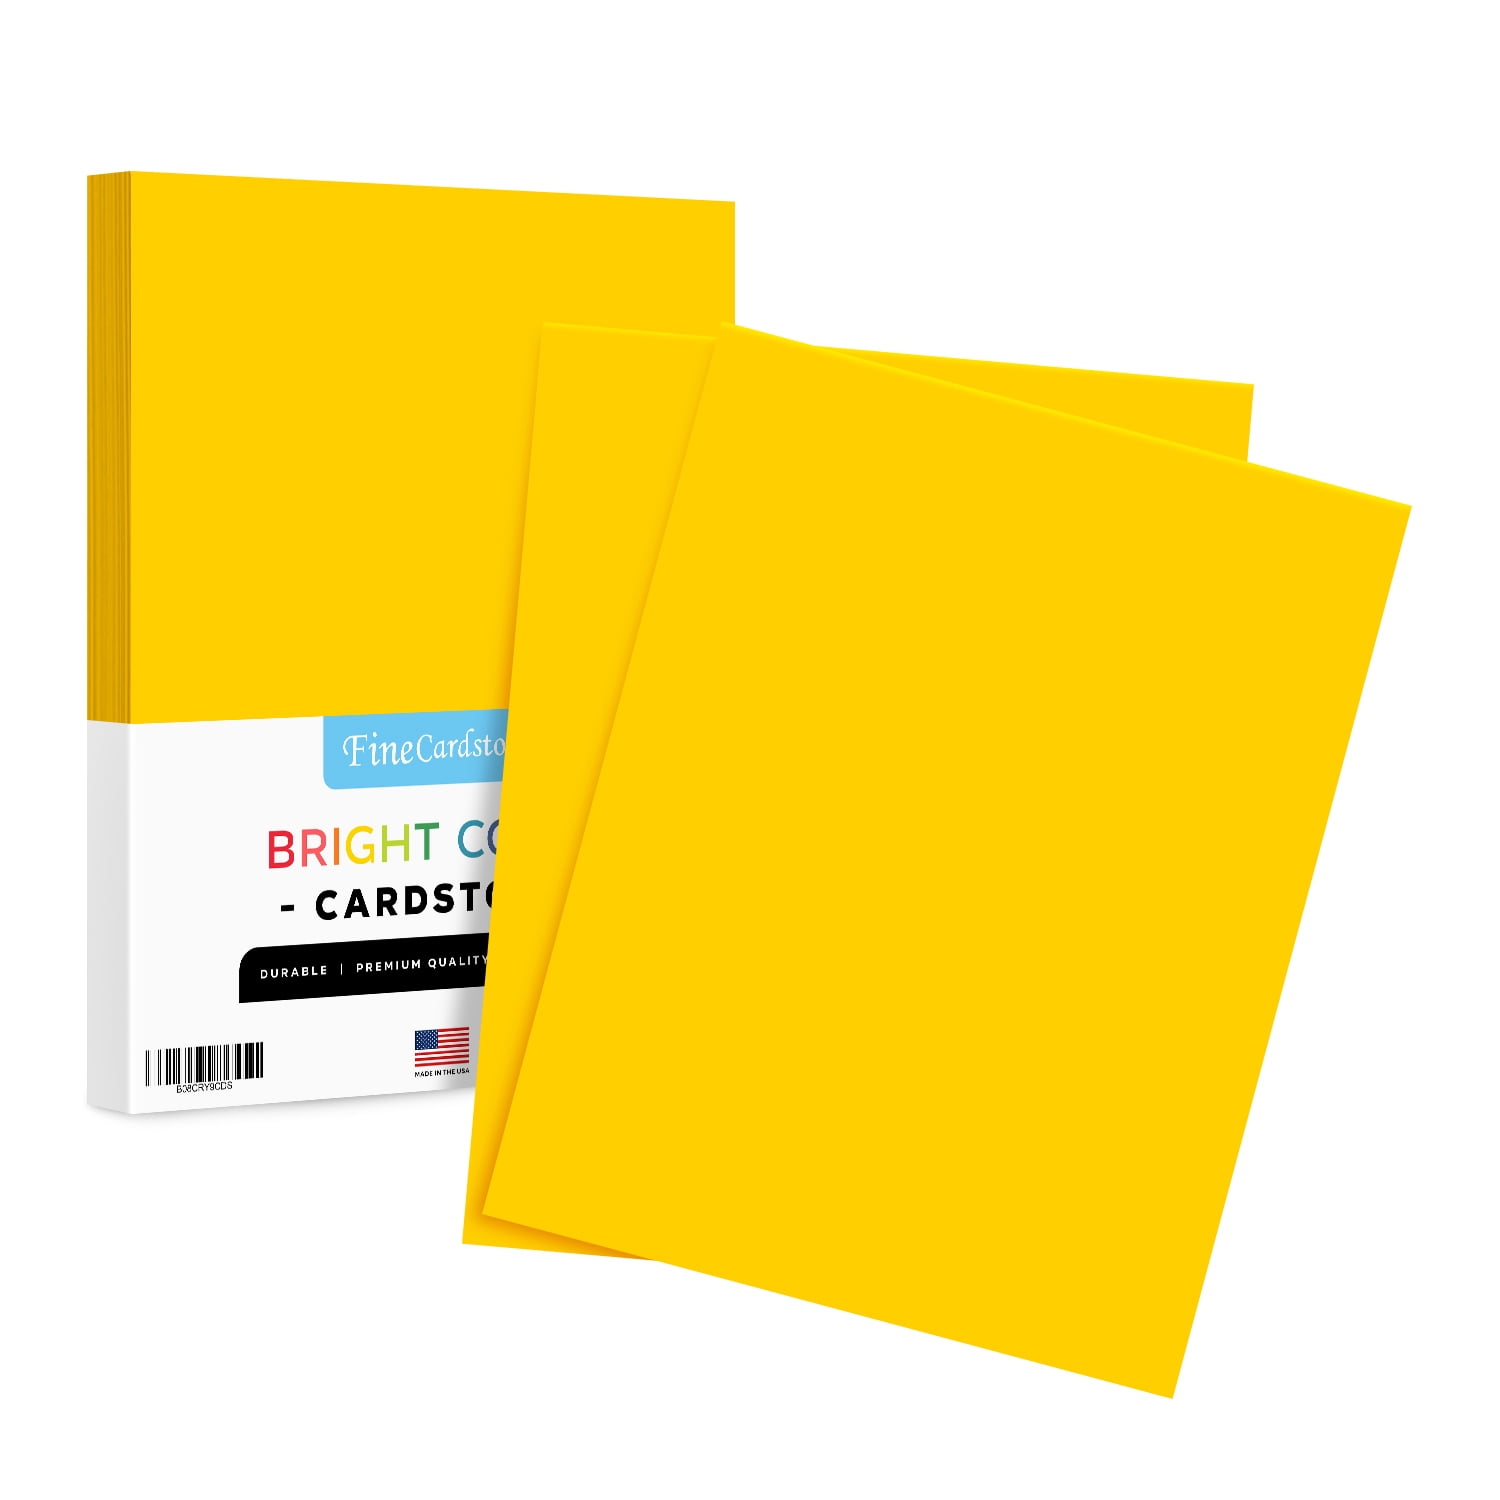 Paper 65 Lb Cover / Cardstock Neenah Astrobrights Premium Color Card Stock 11 x 17, Gamma Green 50 Sheets Per Pack by Superfine Printing Inc.